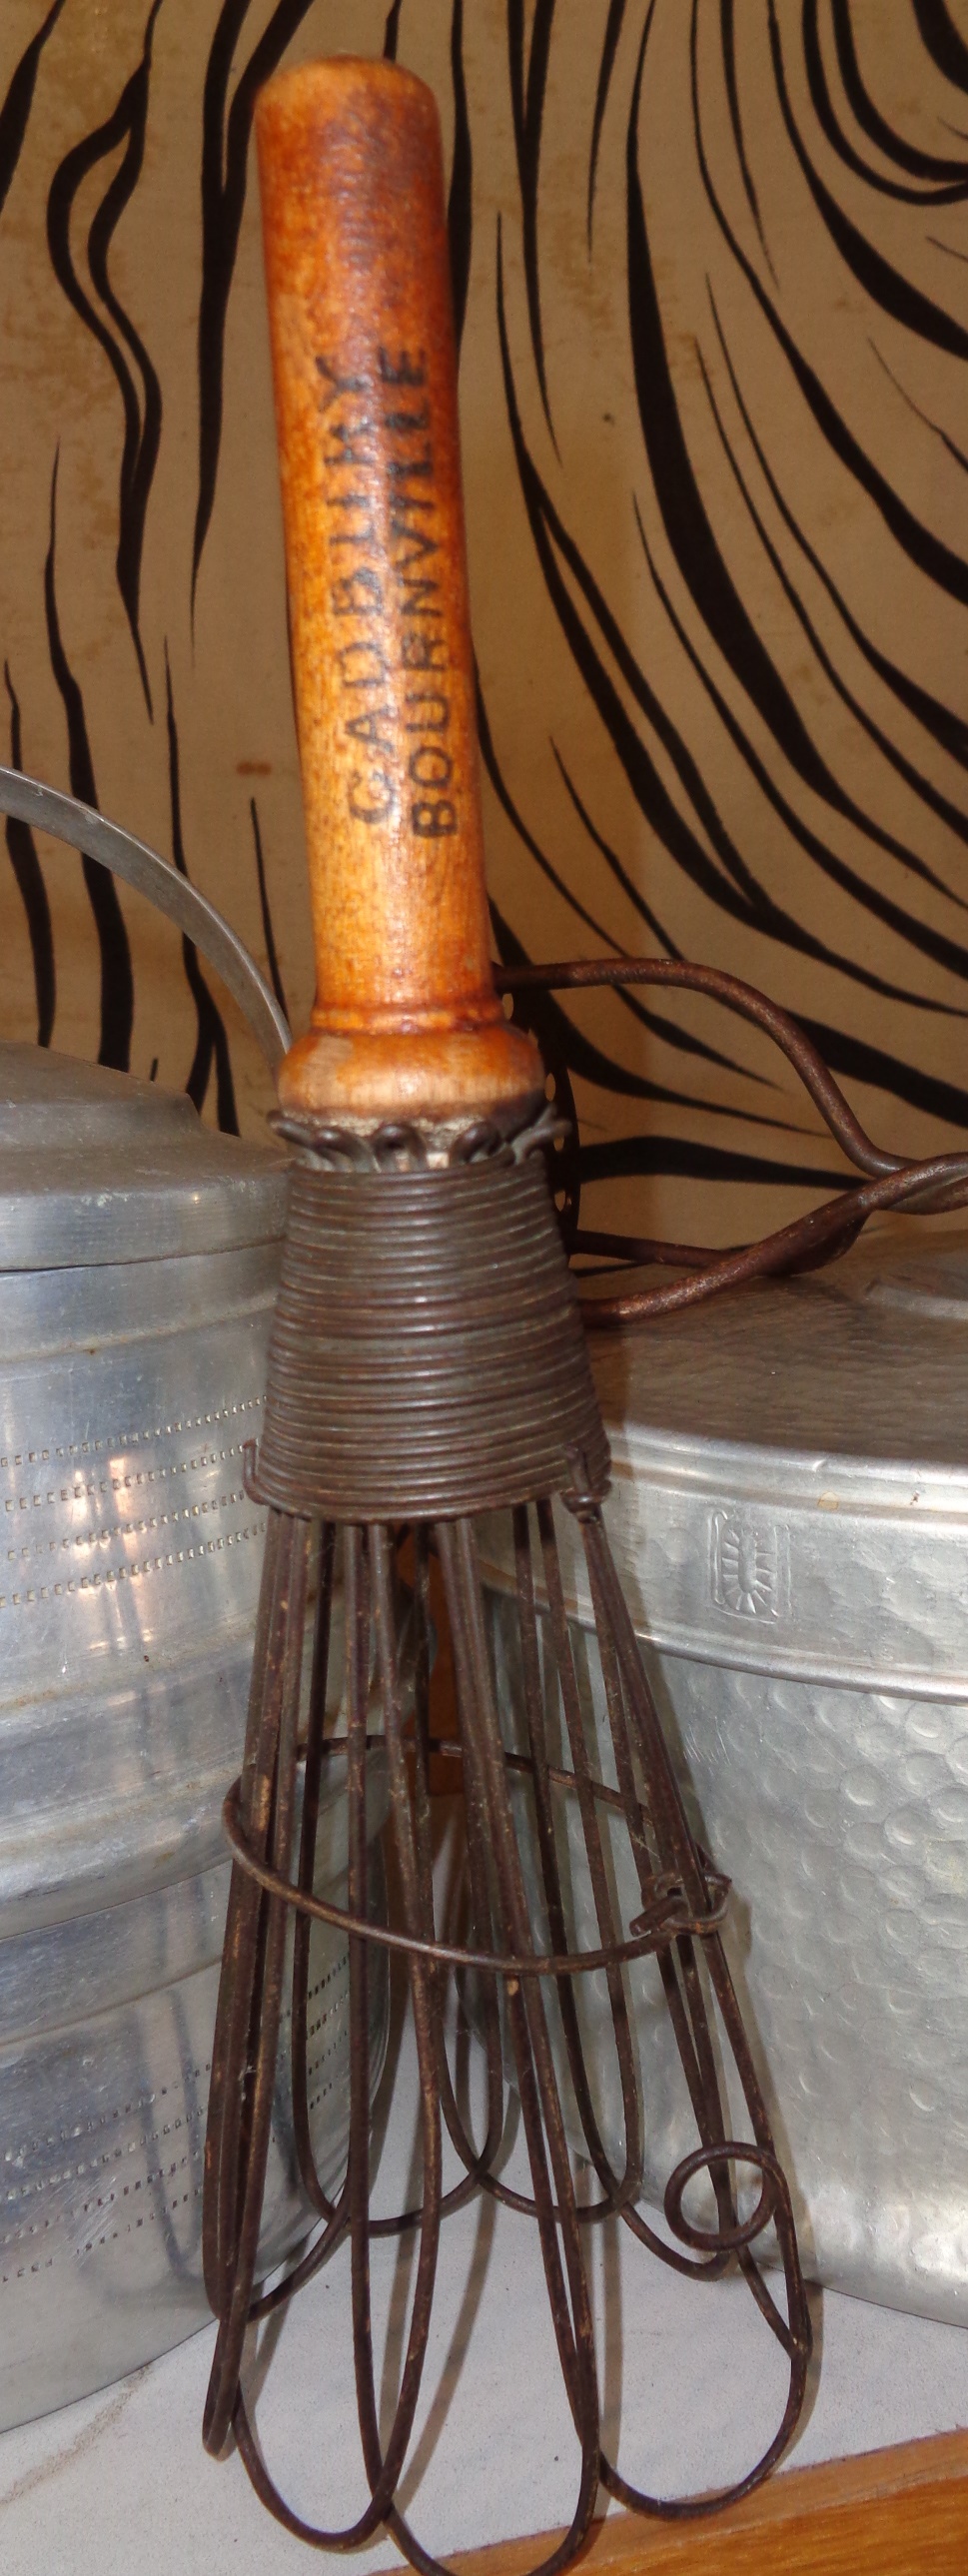 1940's aluminium storage jars (8) including an early Cadbury Bourneville wooden handled whisk - Image 2 of 2